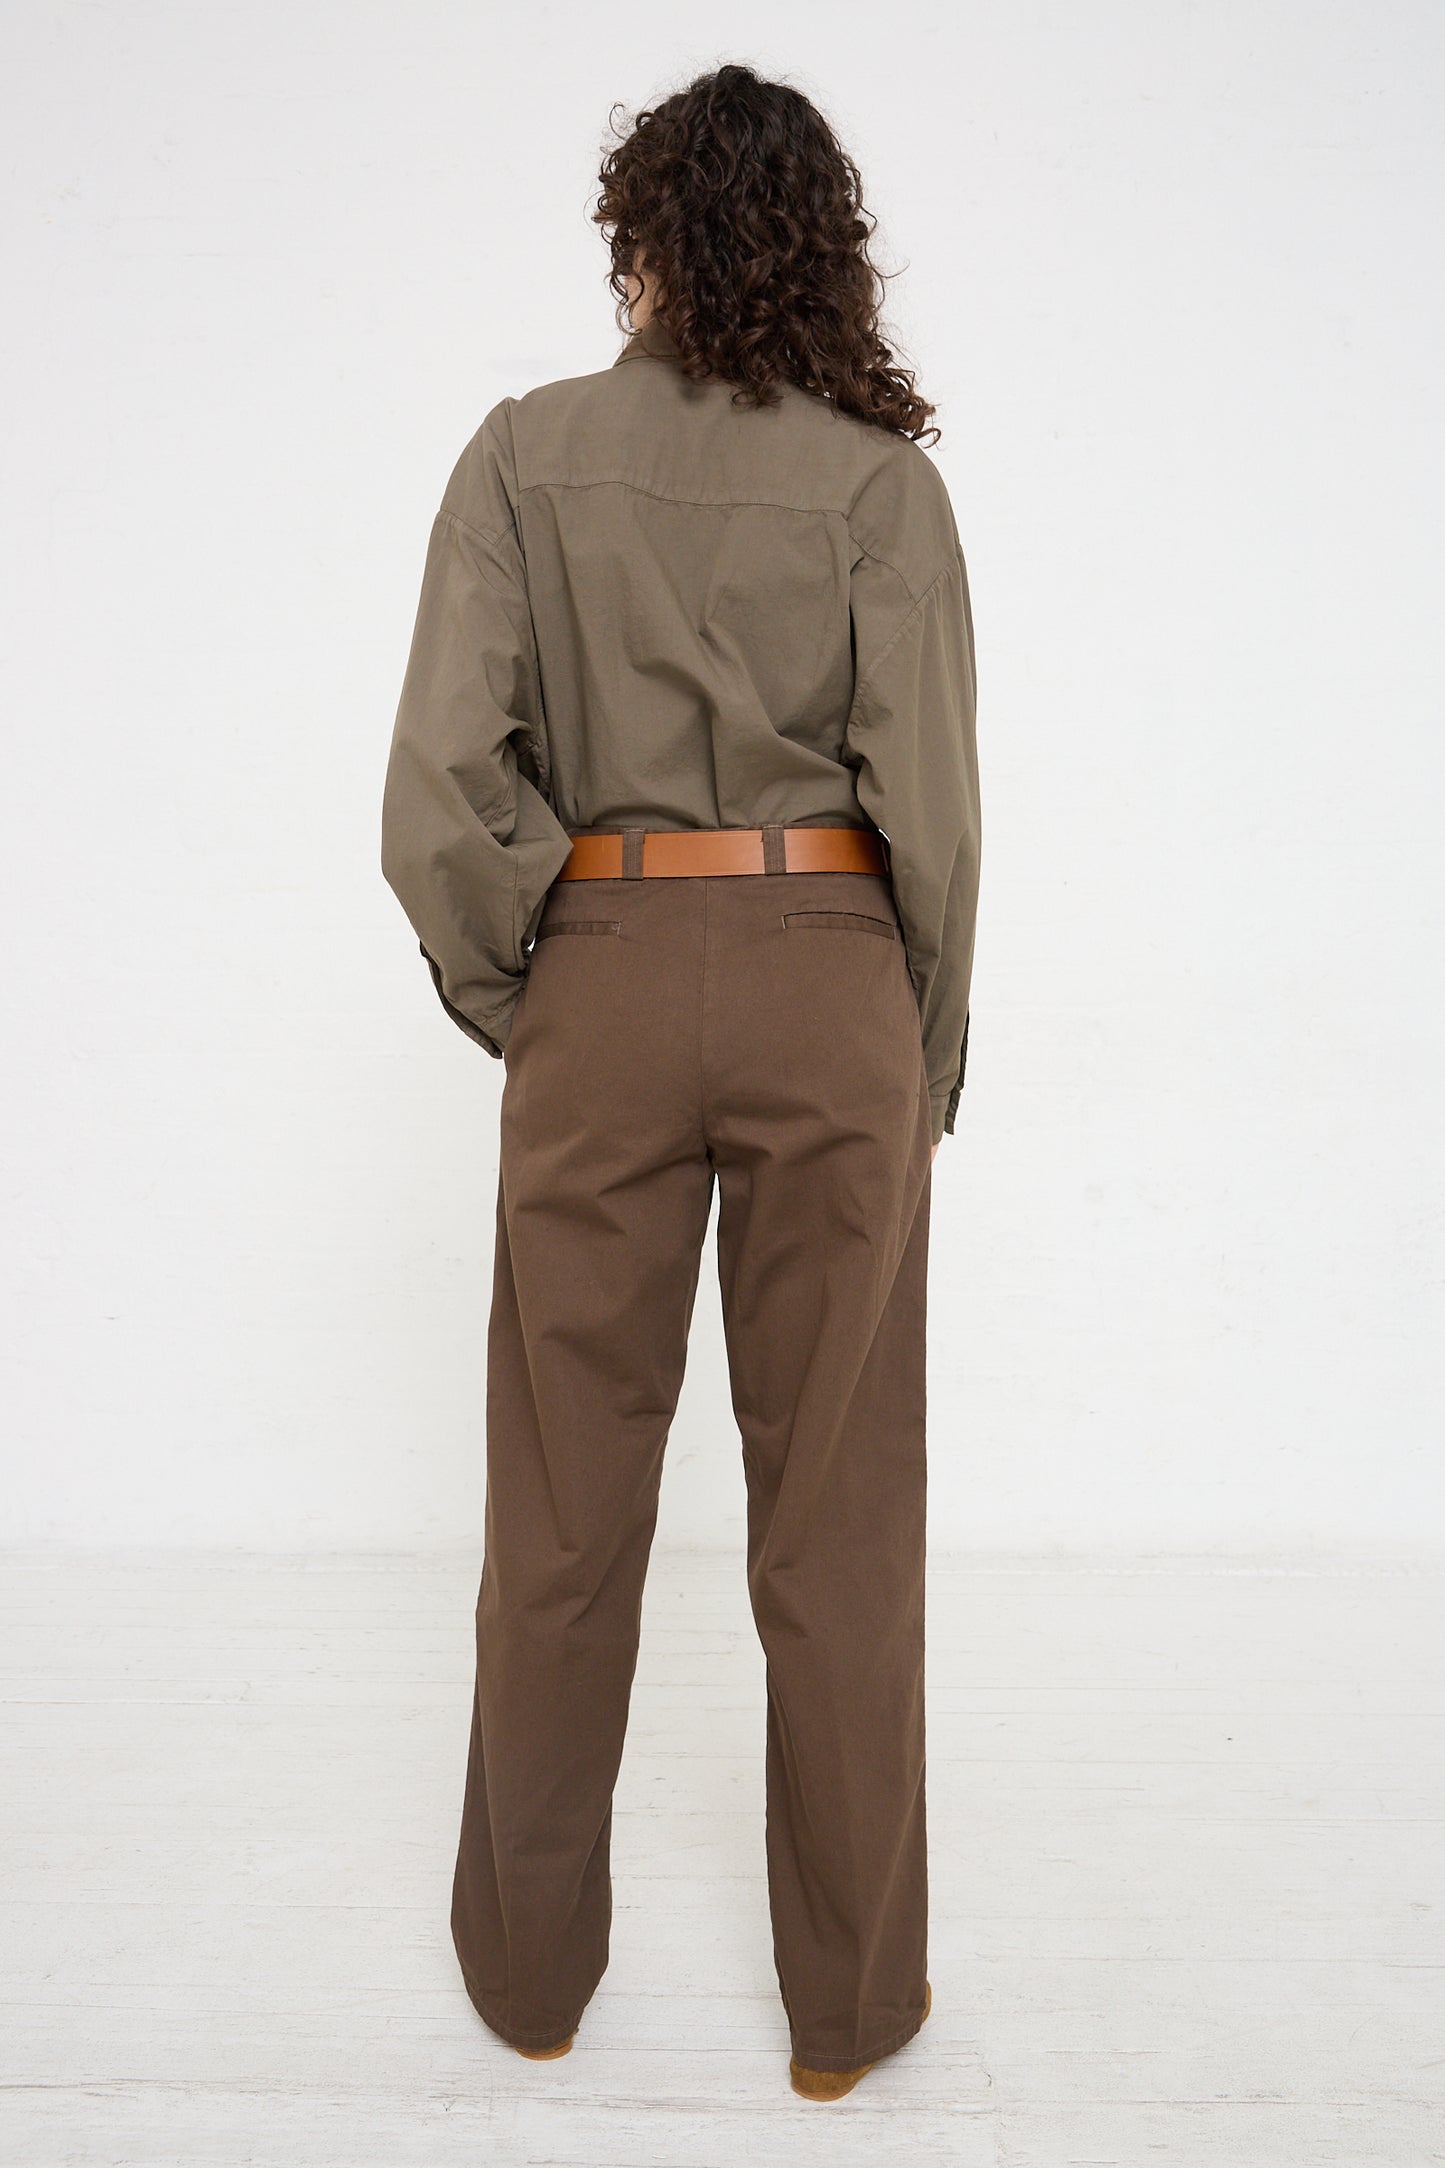 The woman is wearing Jesse Kamm trousers in Mushroom, giving a relaxed and comfortable fit.